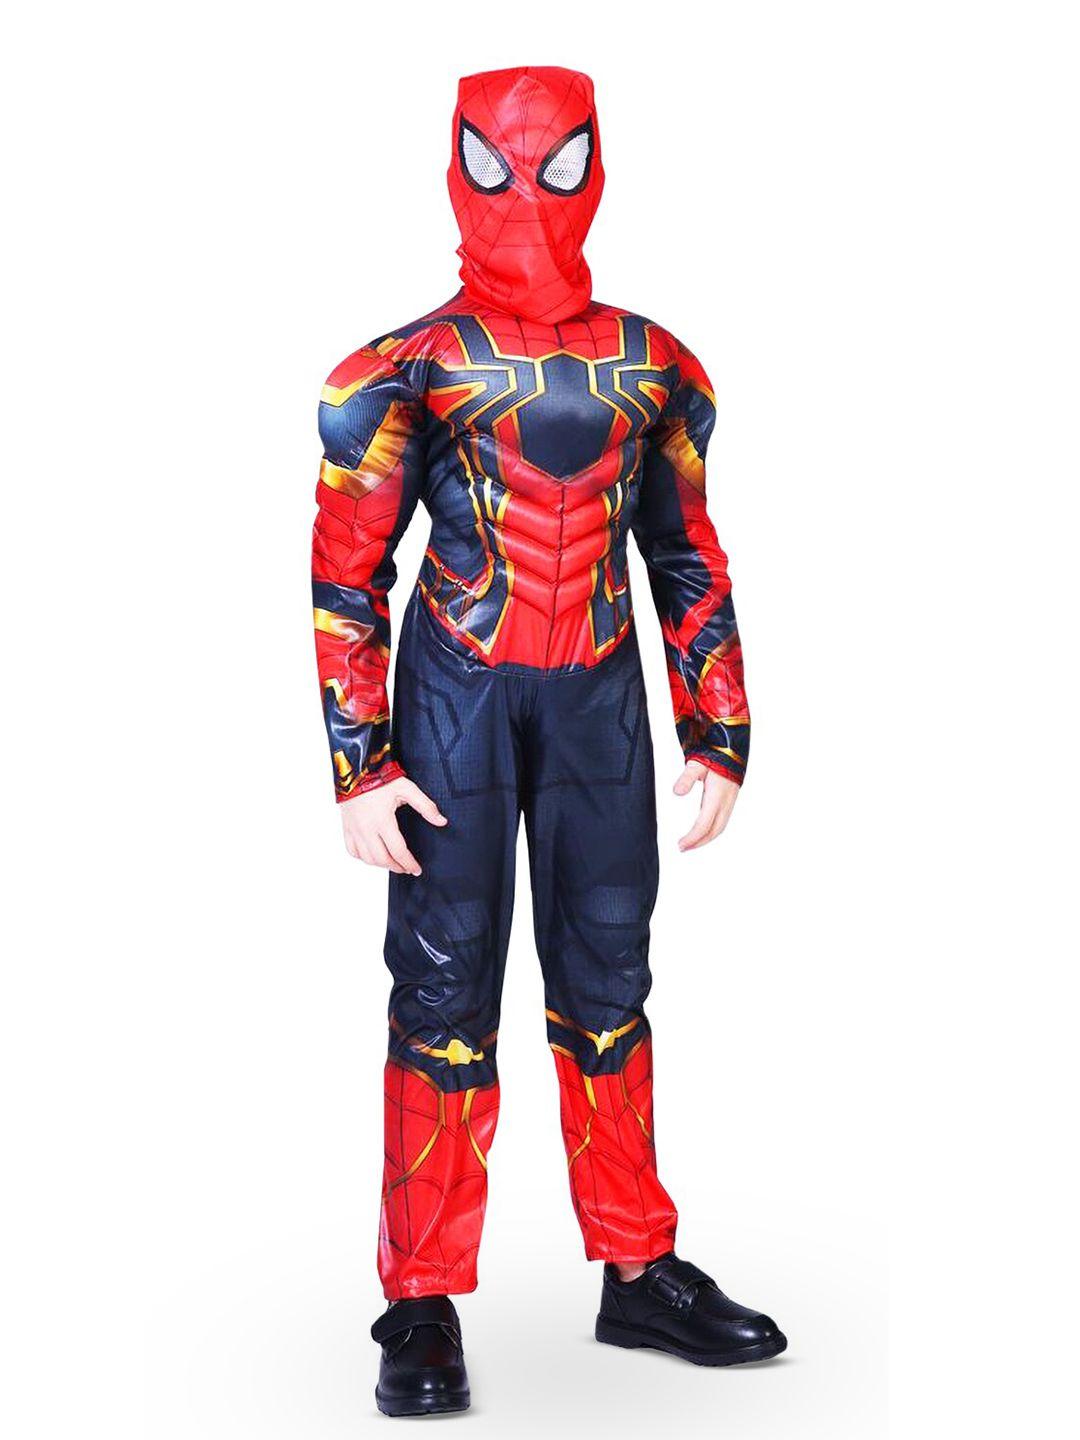 jenna kids muscular arms halloween iron spiderman costume with face mask